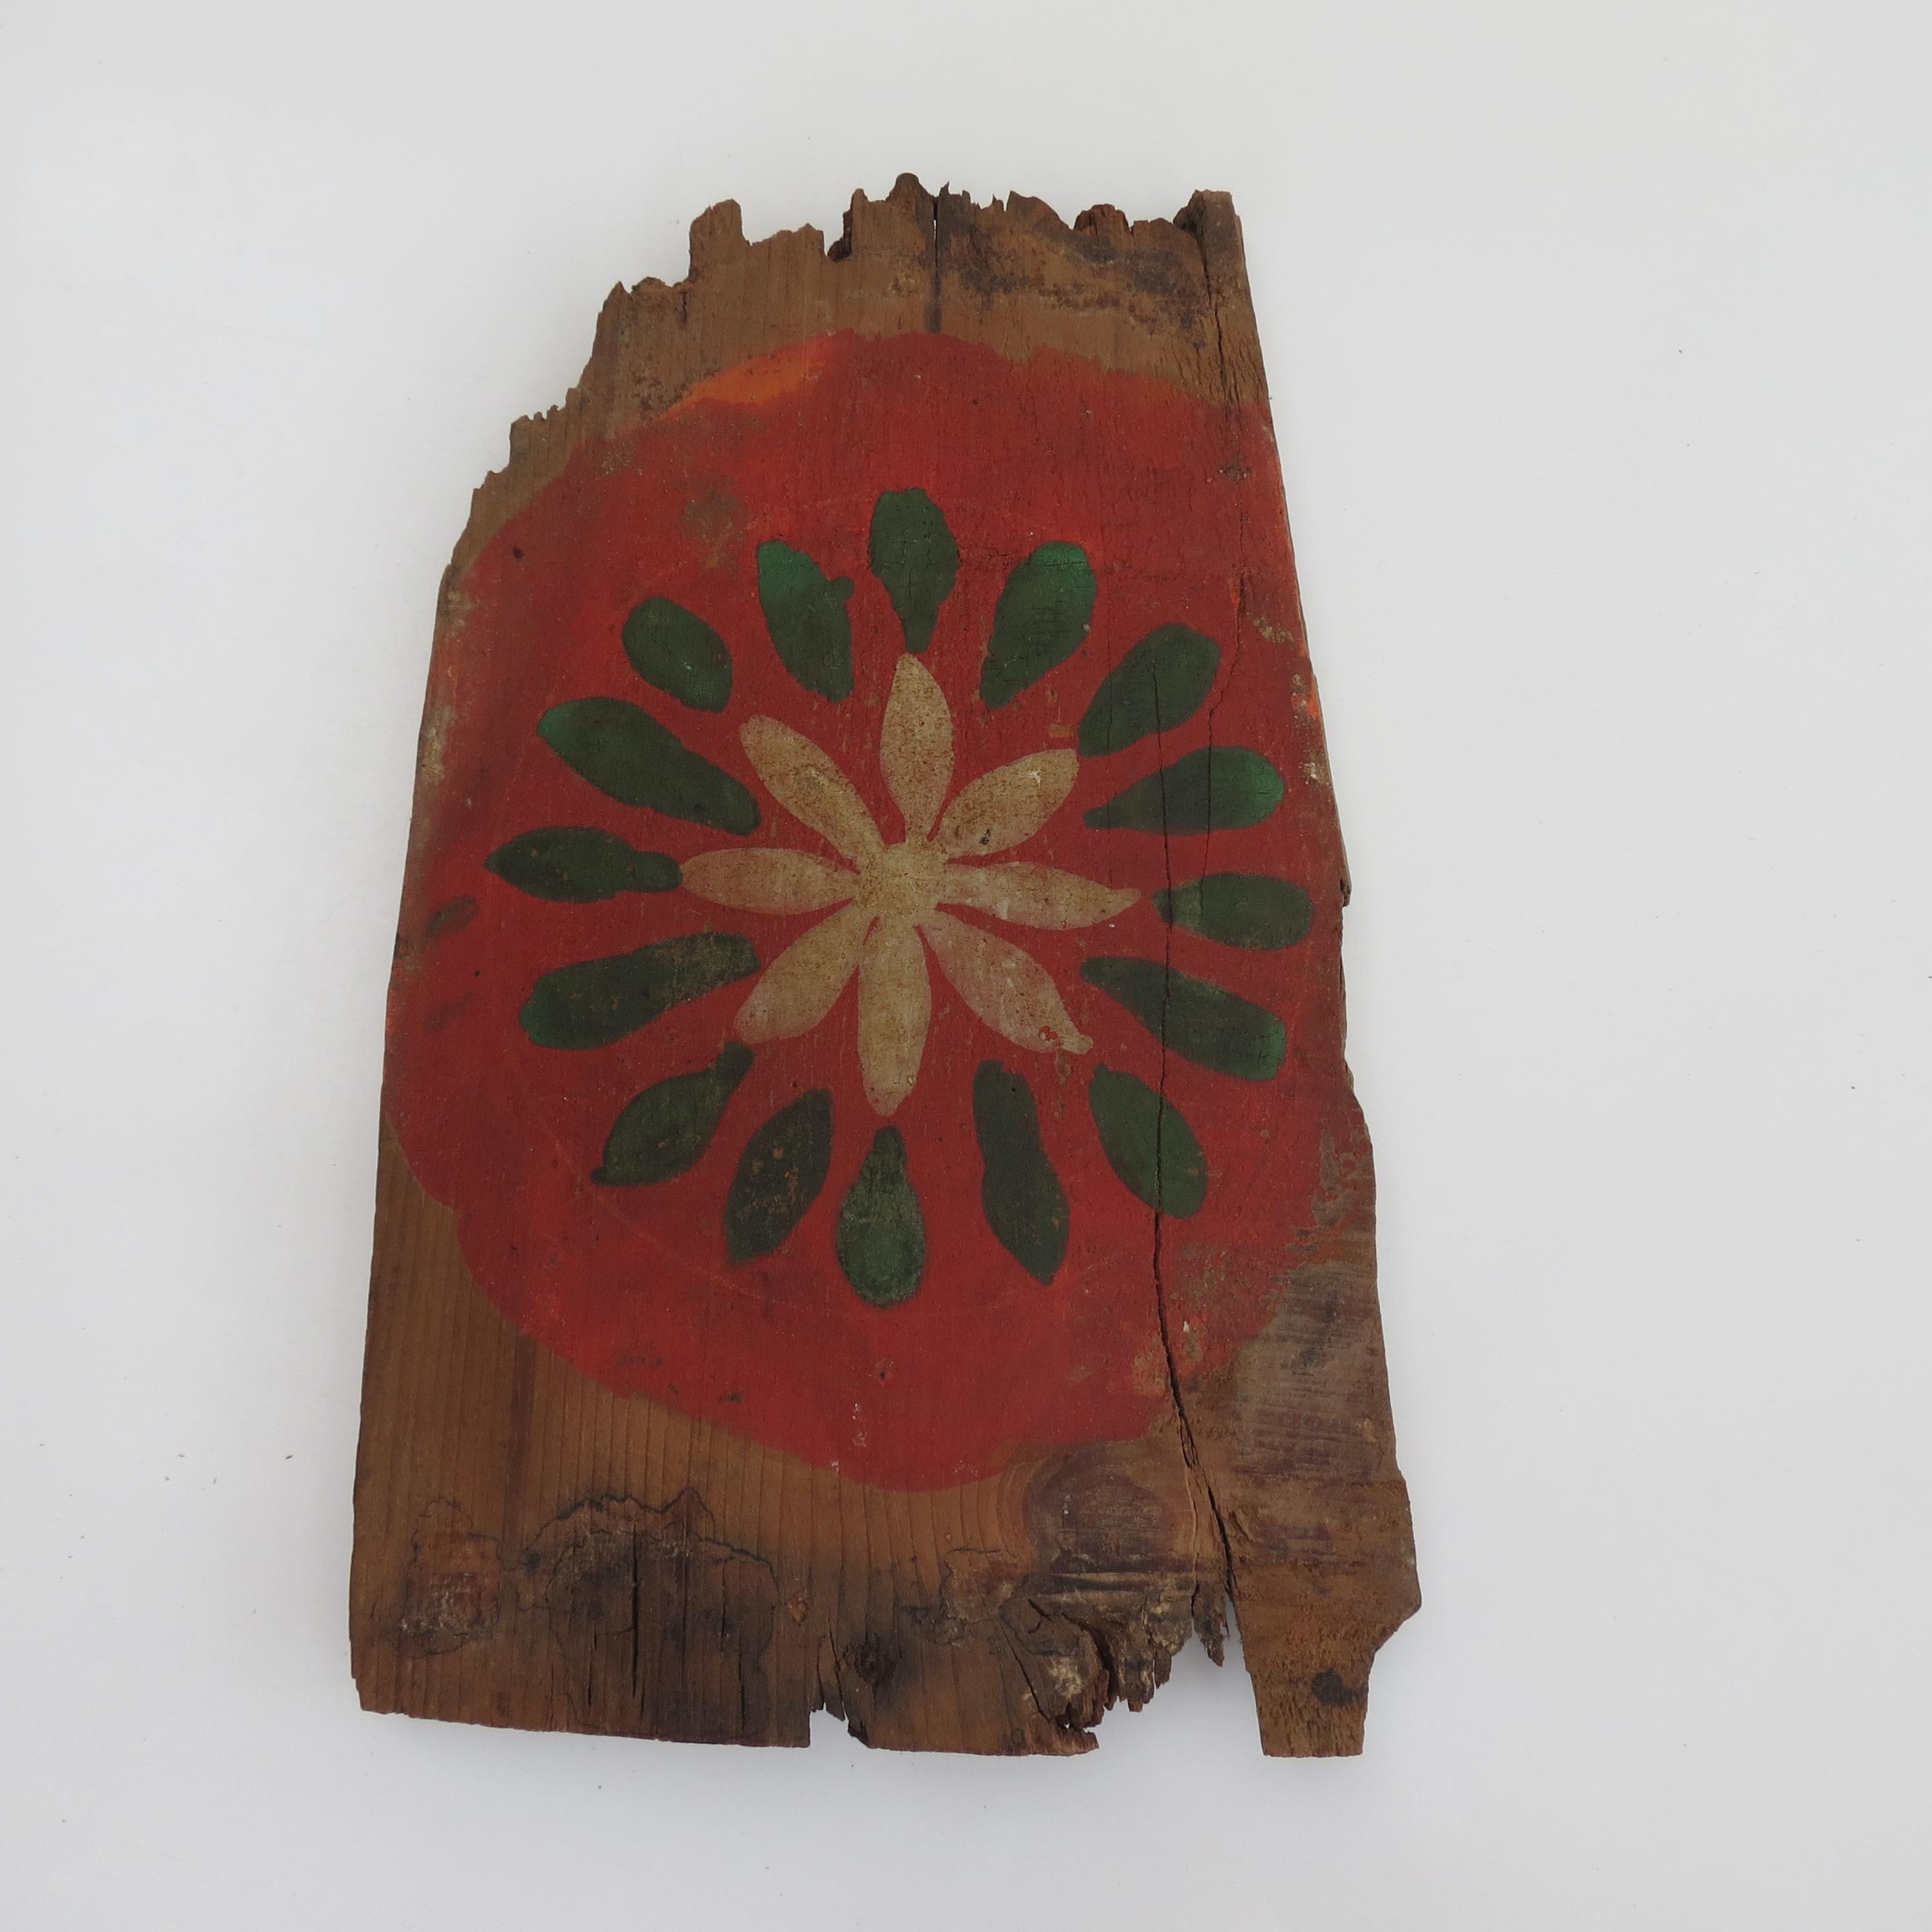 19th century Scandinavian pigment painted wooden shingles Fragments

Very nice hand painted wooden shingles or tiles from Scandinavia with wonderful pigment painted decoration. These date from the 19th century and would originally have been part